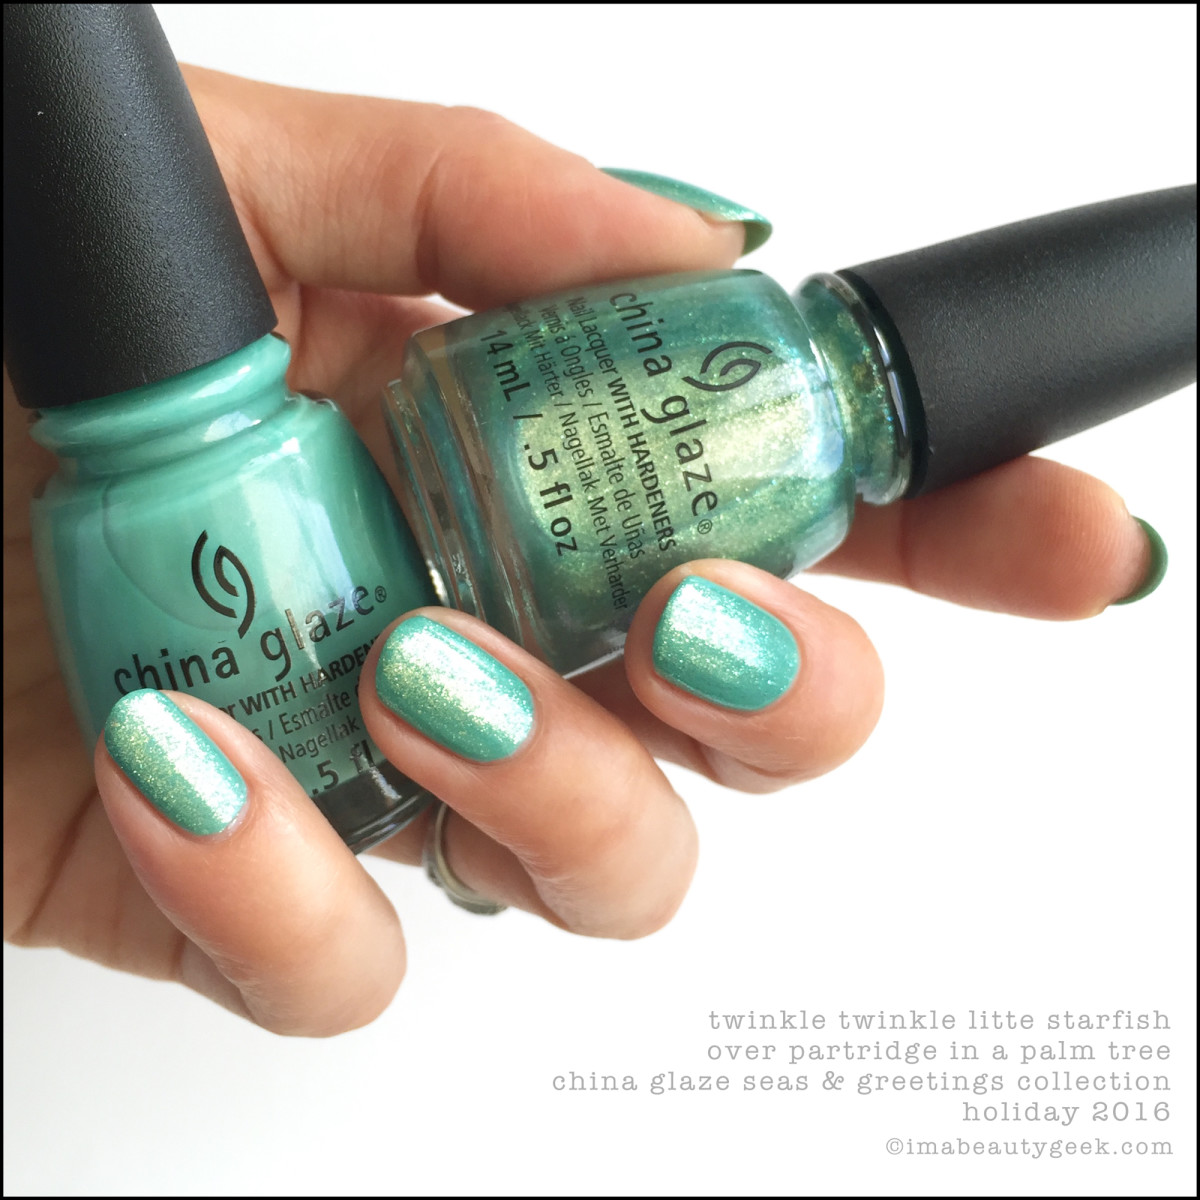 China Glaze Twinkle Twinkle over Partridge Palm_China Glaze Seas Greetings Holiday 2016 Swatches Review